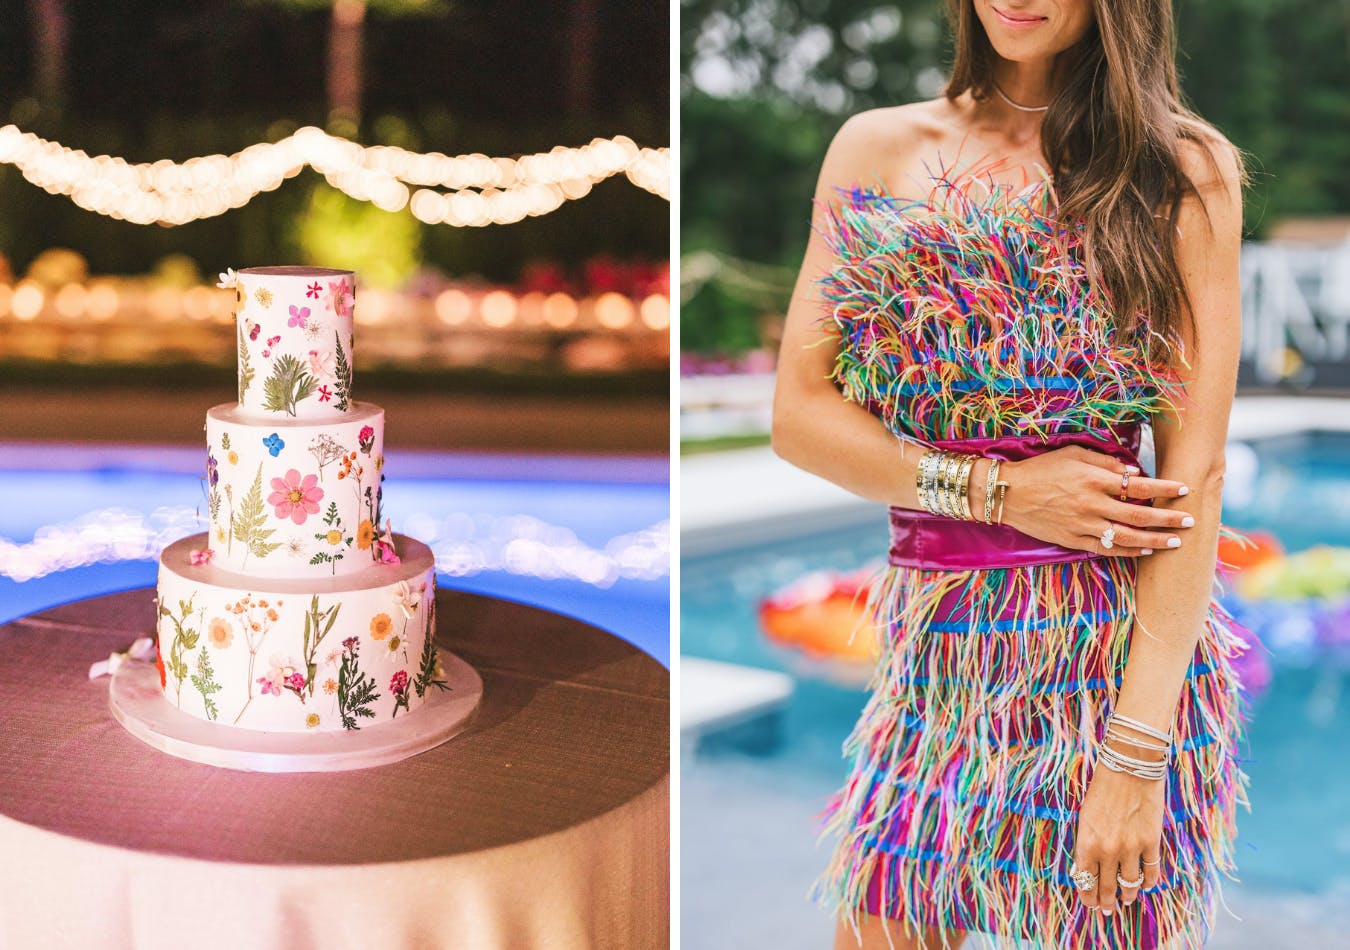 Birthday girl in rainbow fringe dress and pressed floral birthday cake | PartySlate